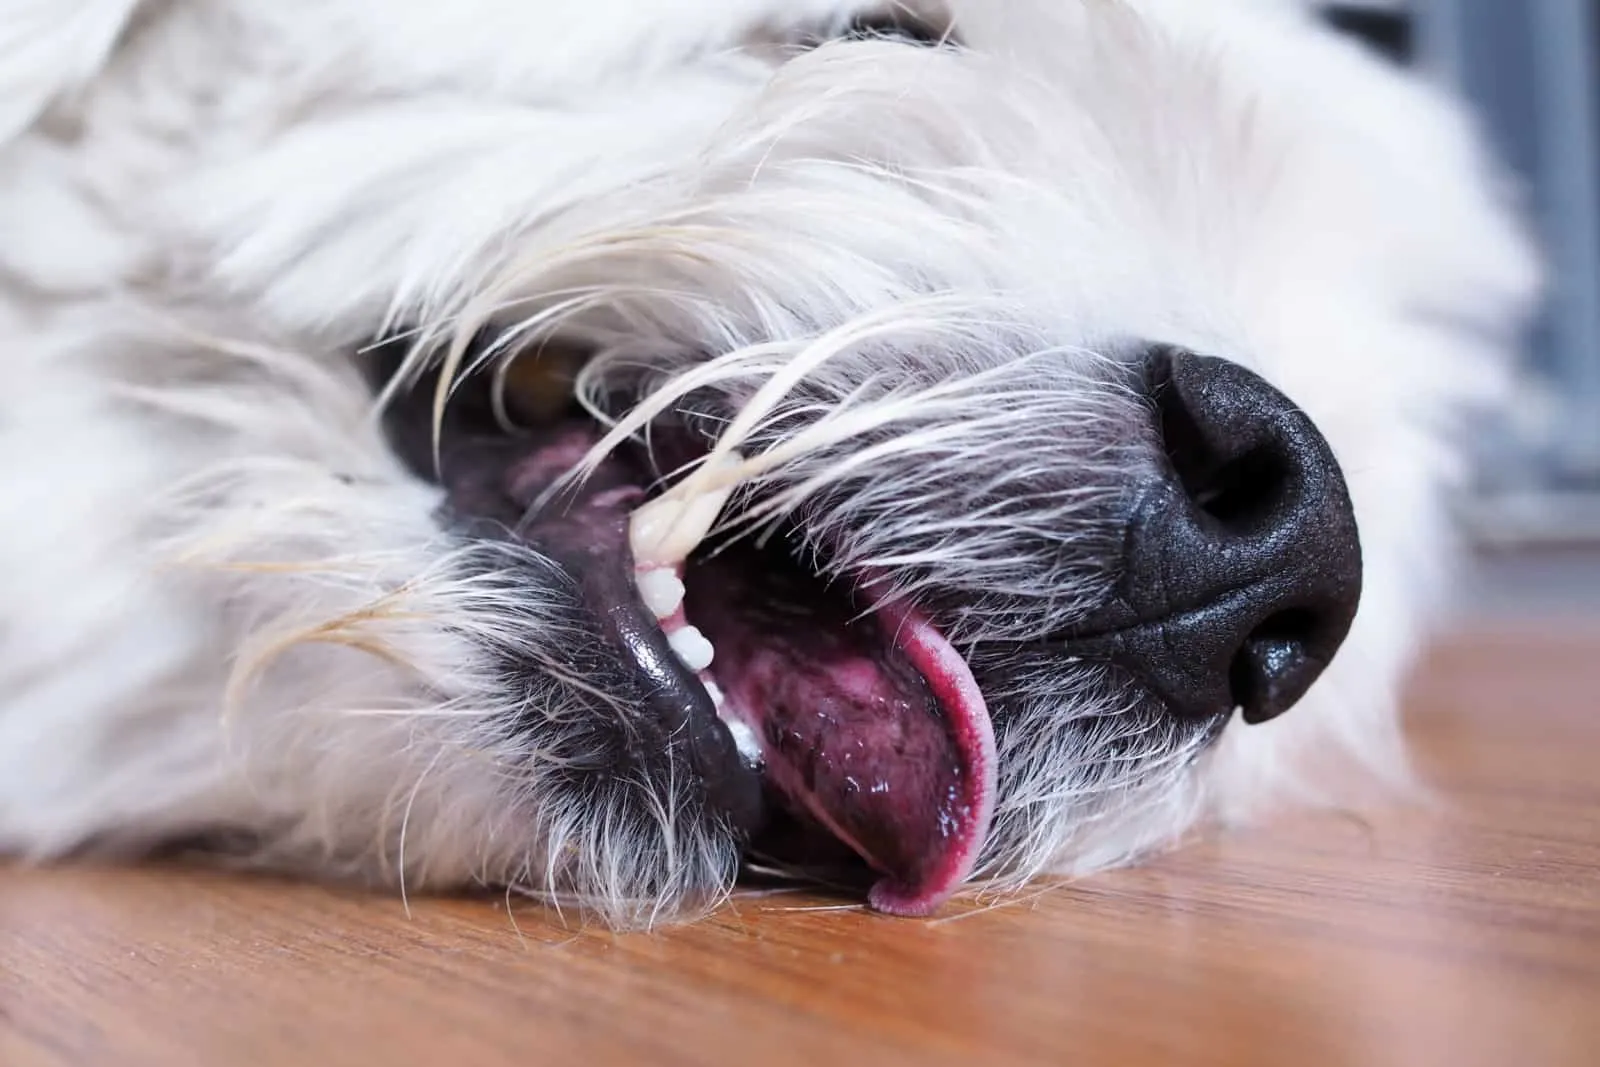 White fur dog Lying on wooden floor and Tongue sticking for cooling